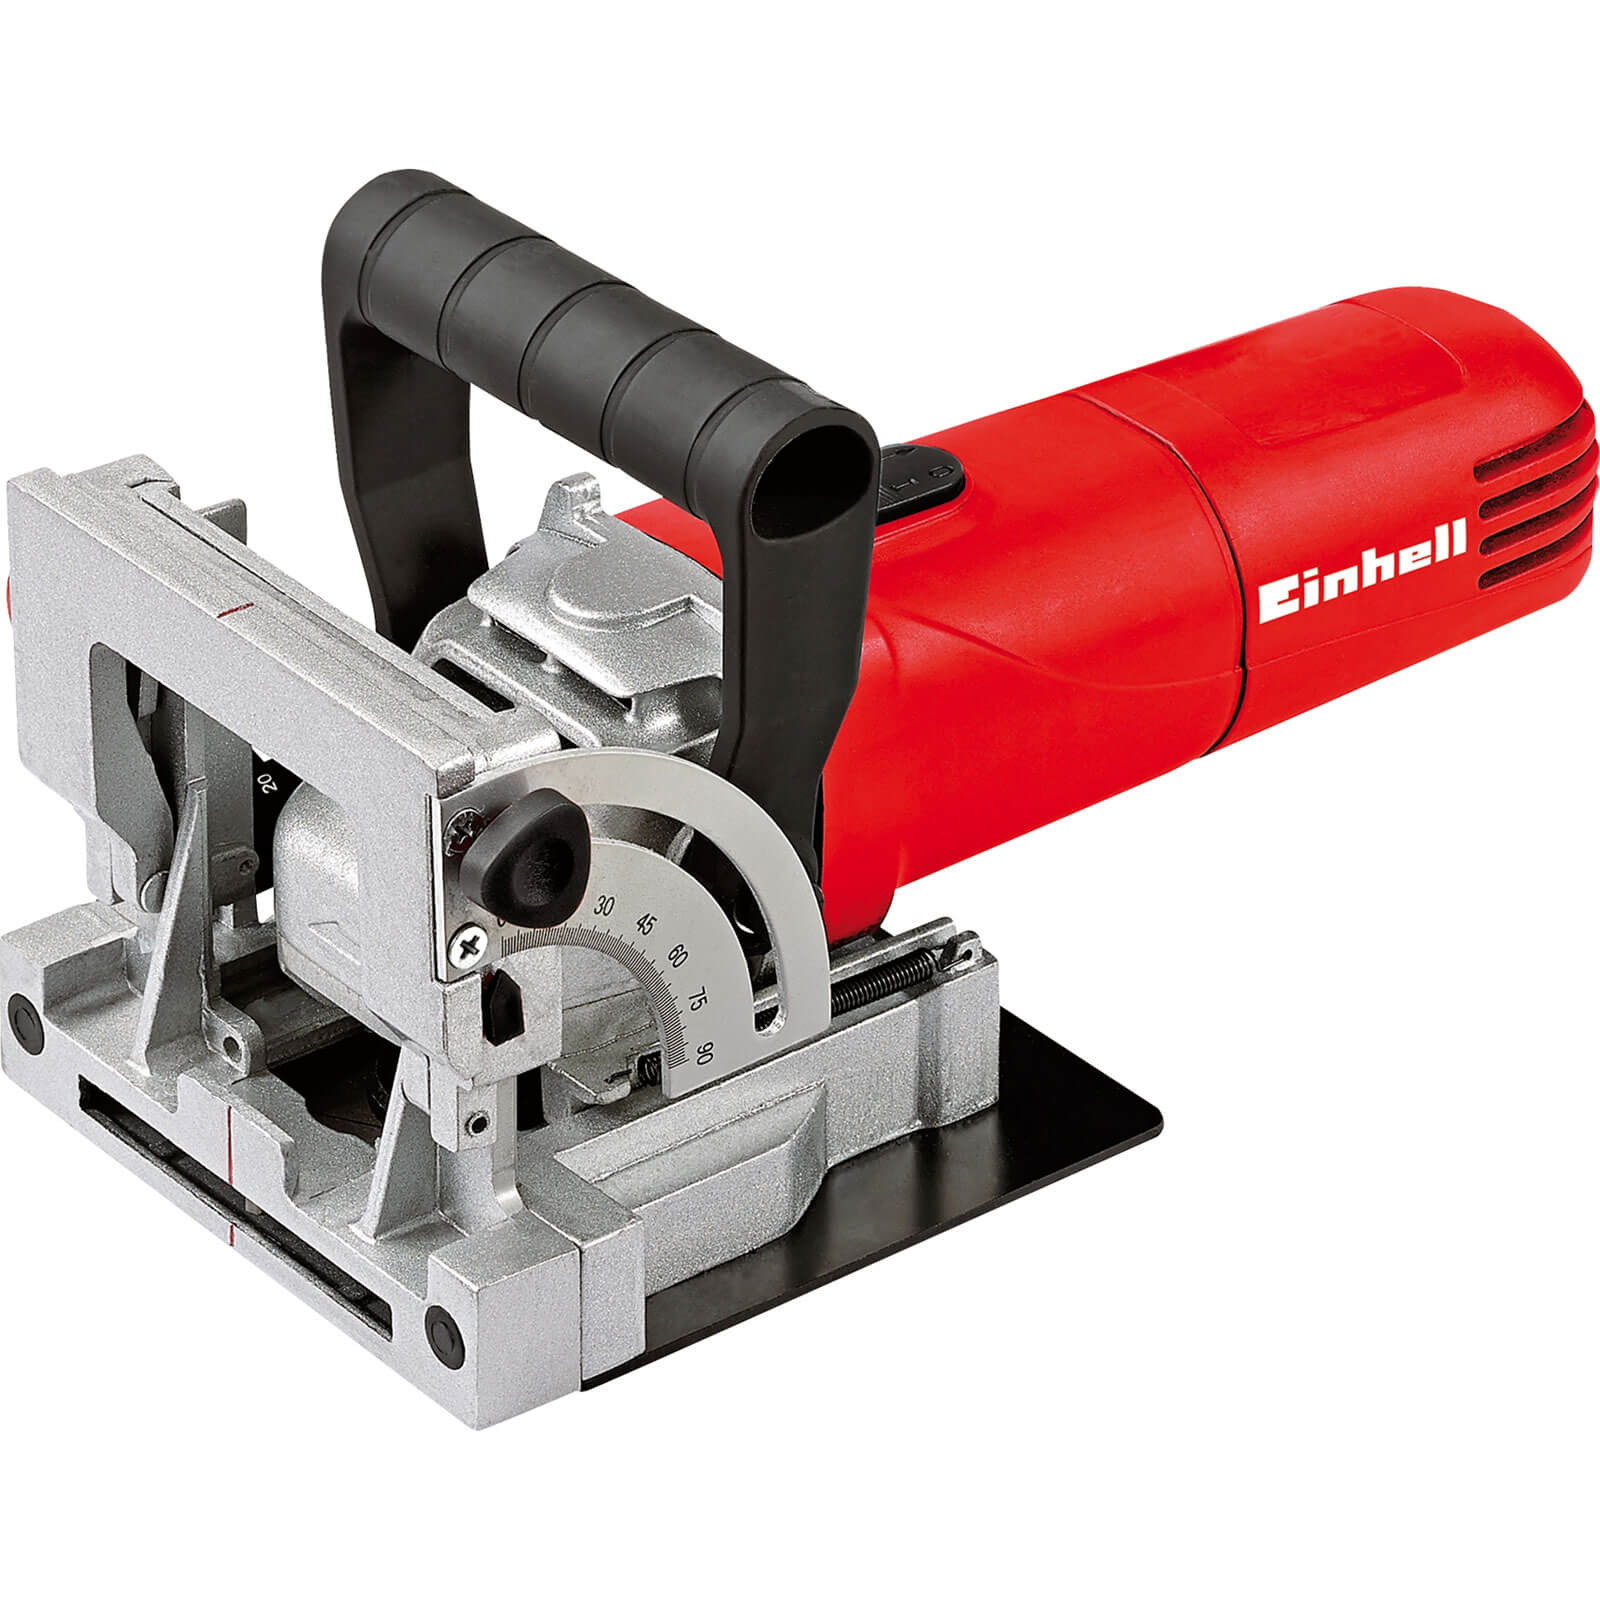 Image of Einhell TC-BJ 900 Biscuit Jointer 240v